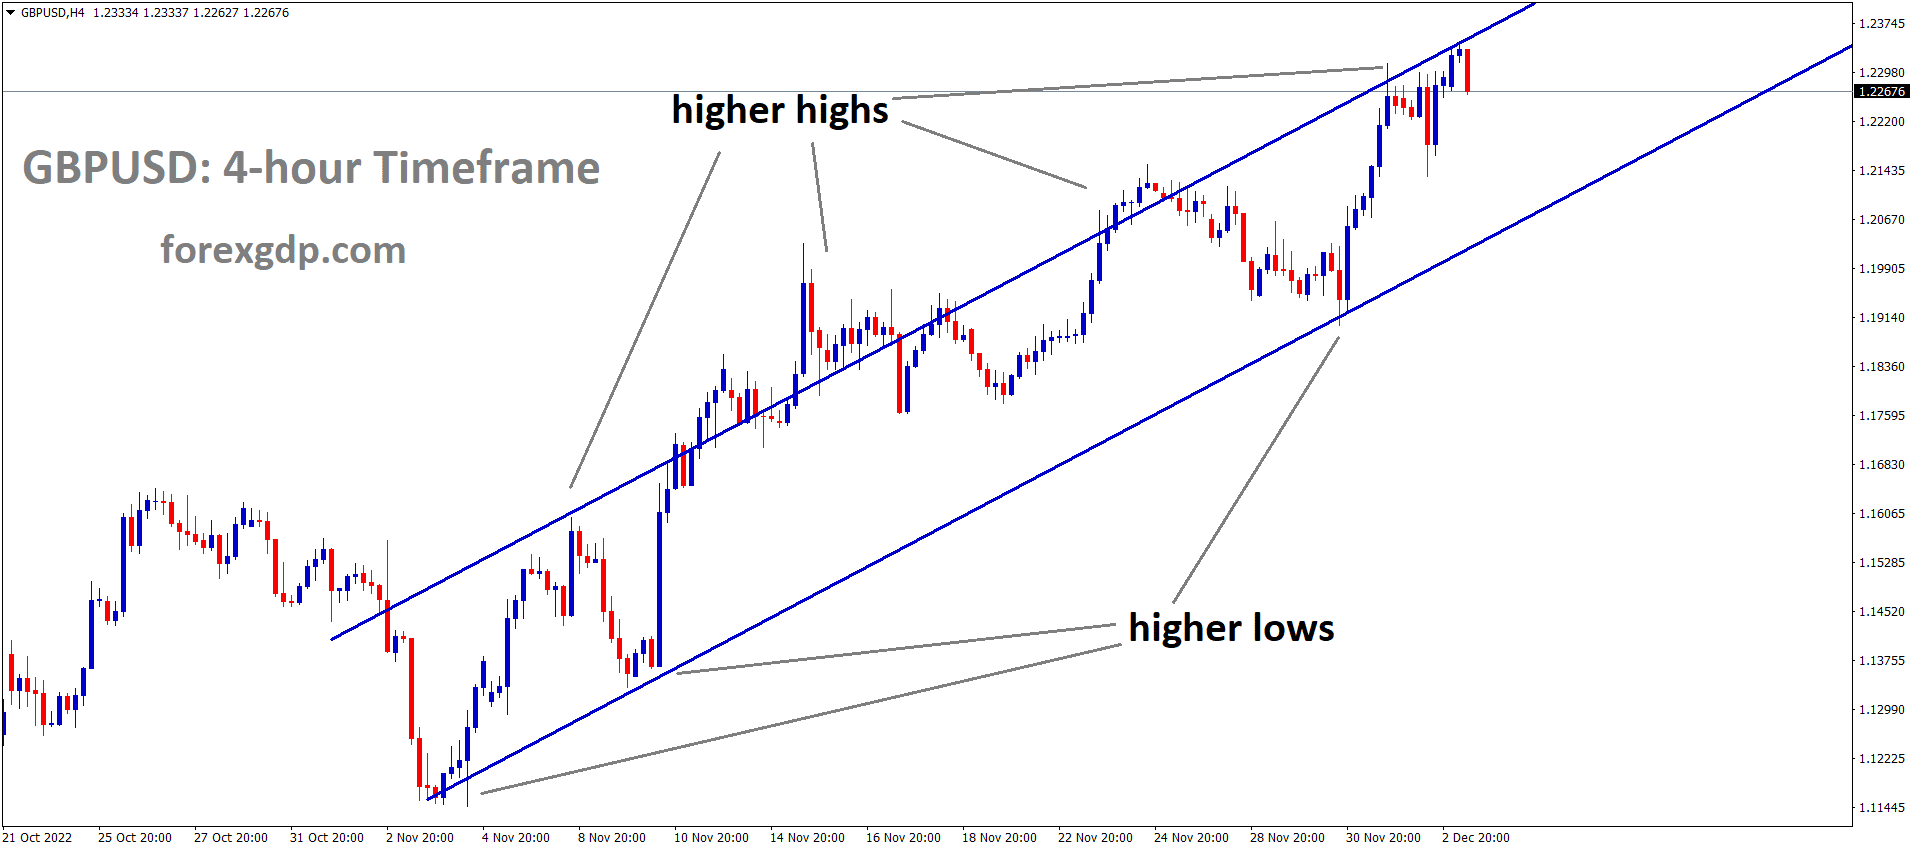 GBPUSD is moving in an Ascending channel and the market has reached the higher high area of the channel 1